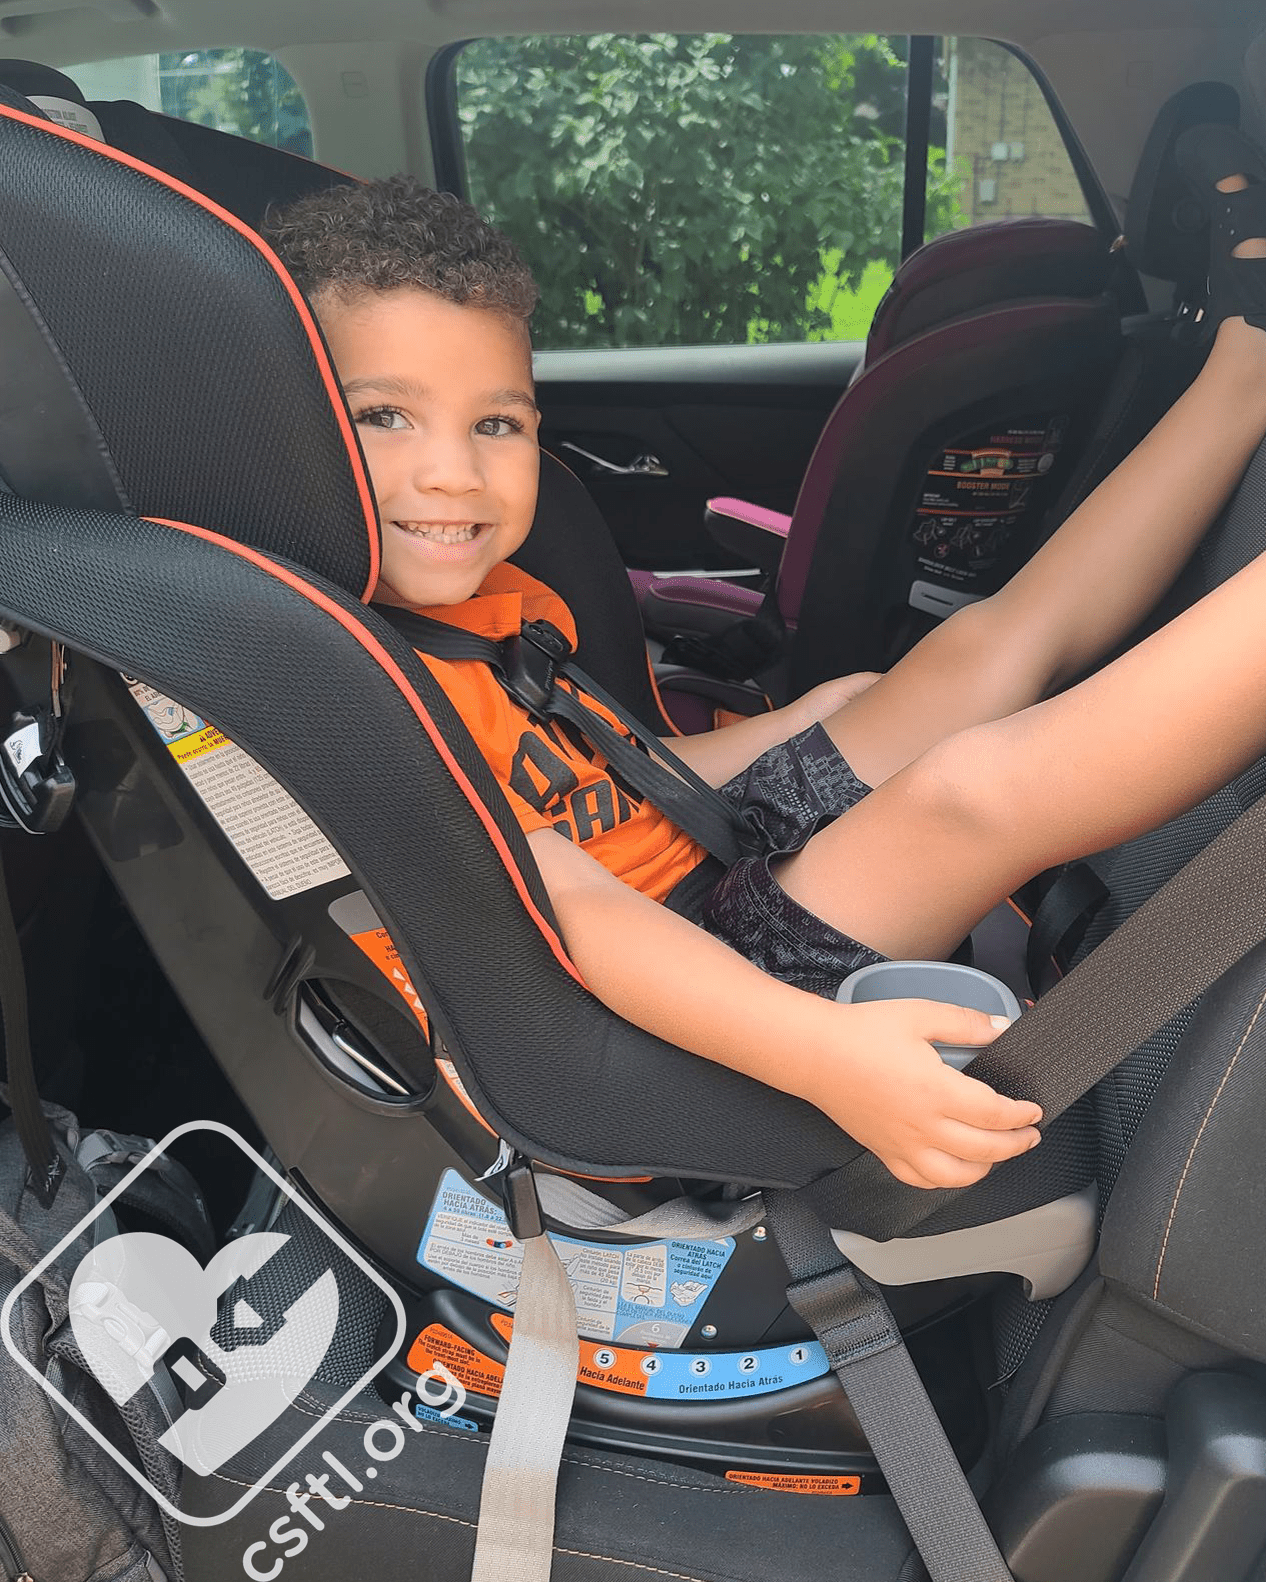 Is the base of an infant car seat really necessary?